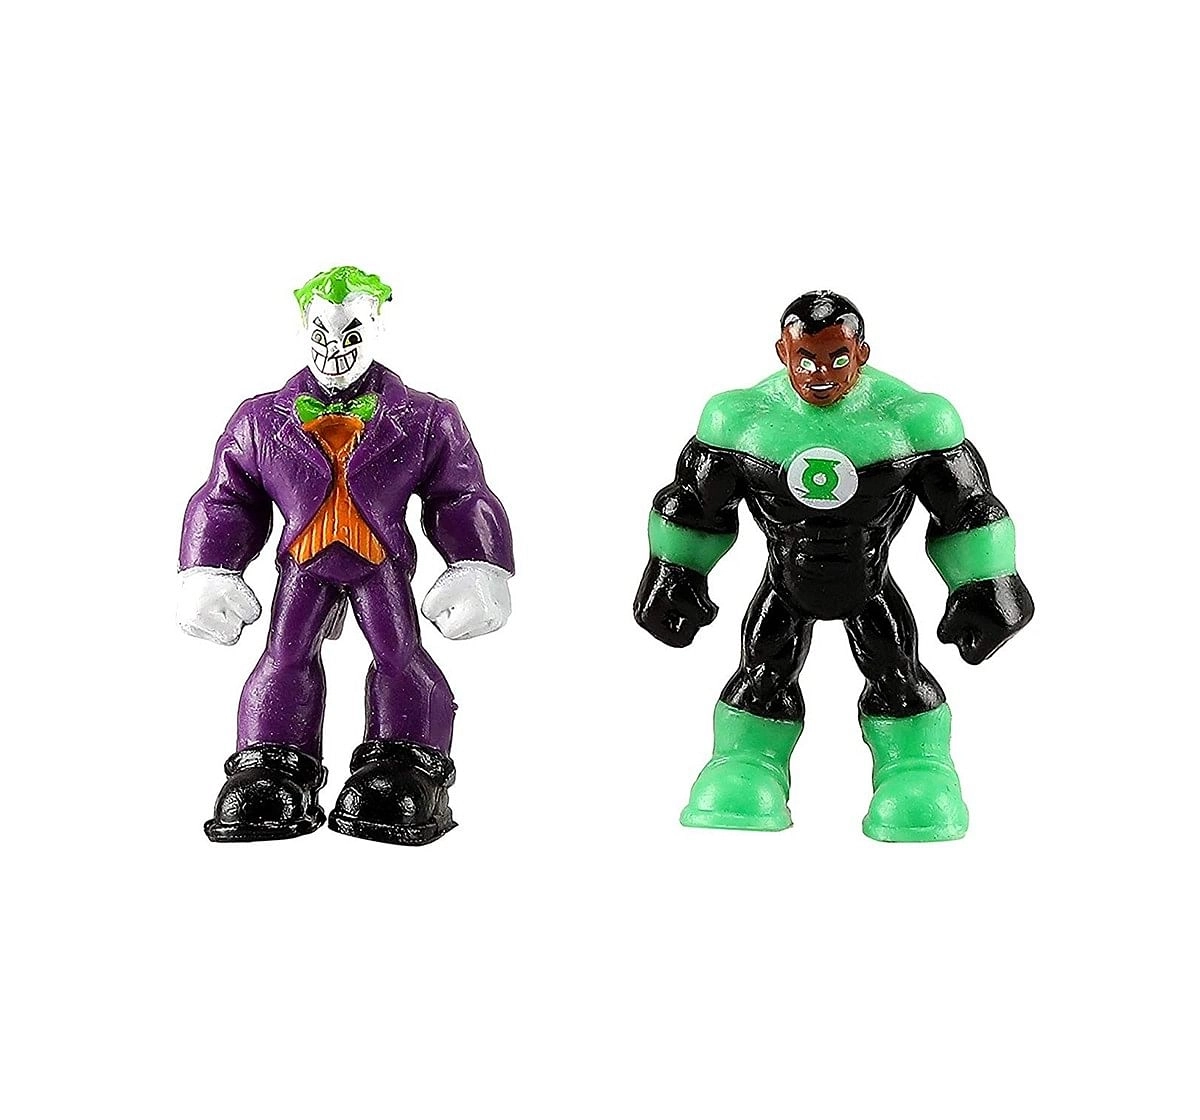 DC Super Friends The Joker & Green Lantern Slime Mix with 2 Liquid & 1 Jelly Slime